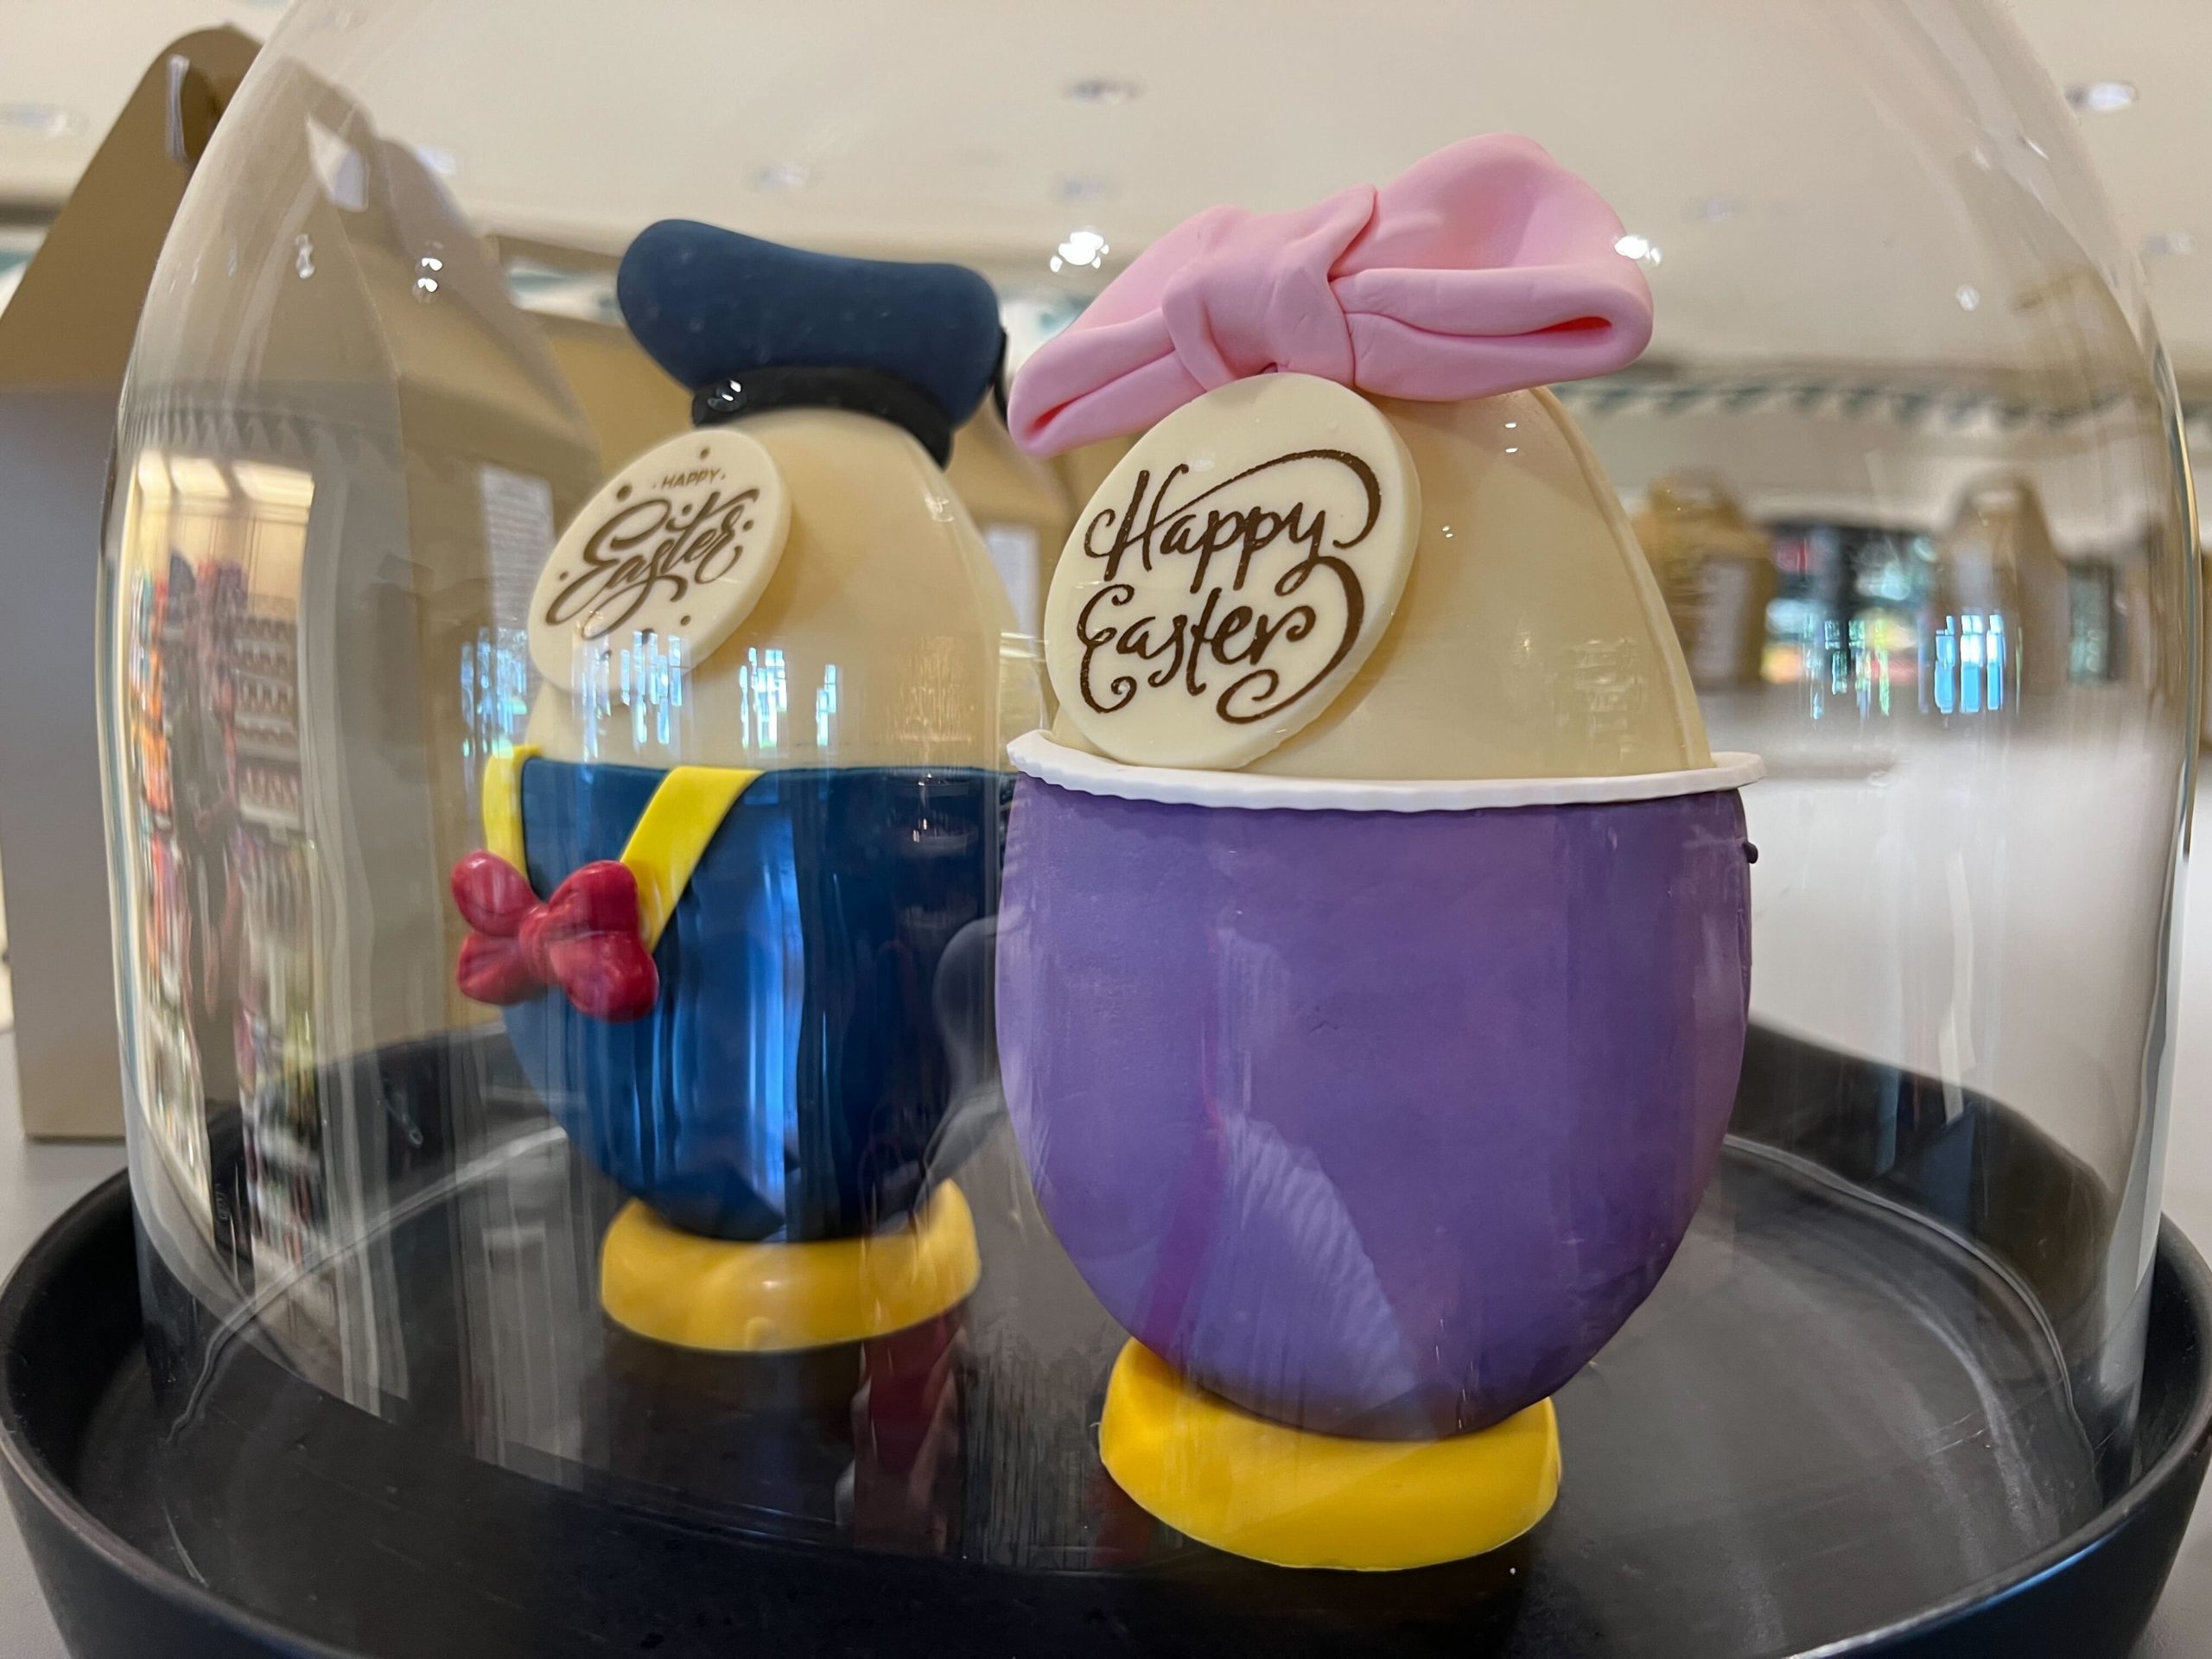 Donald and Daisy white chocolate eggs